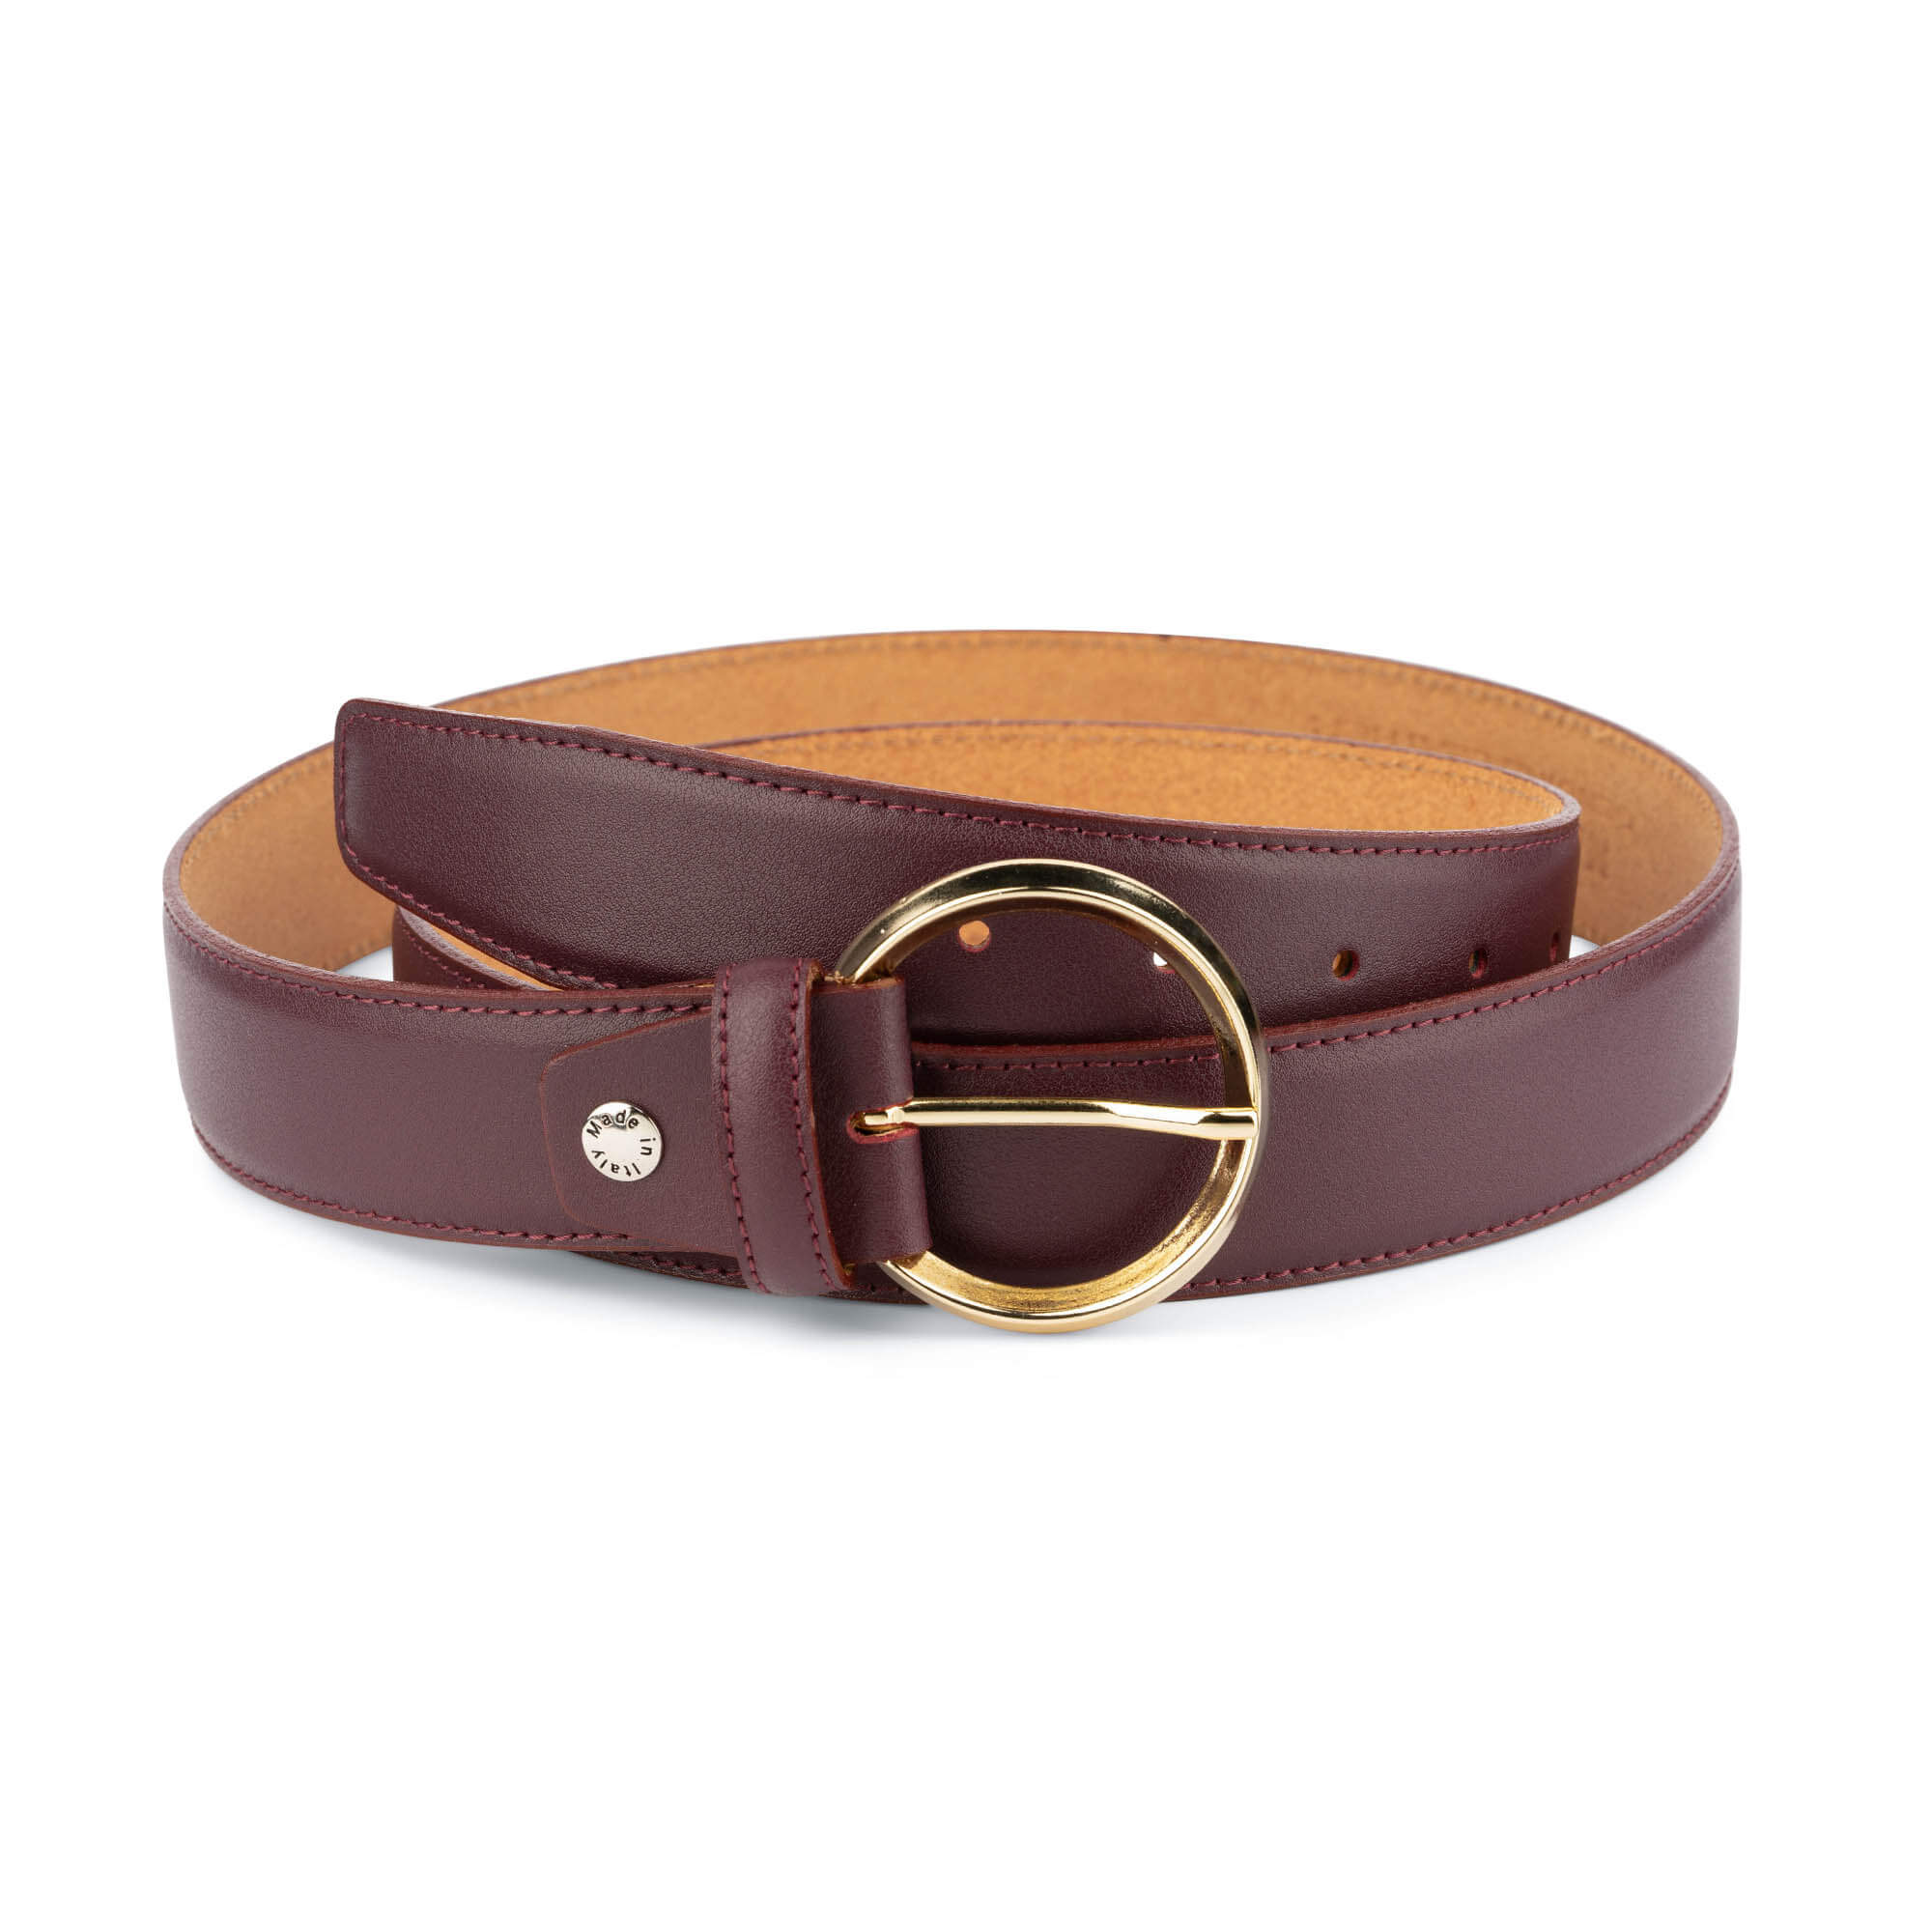 Buy Burgundy Leather Belt With Gold Circle Buckle